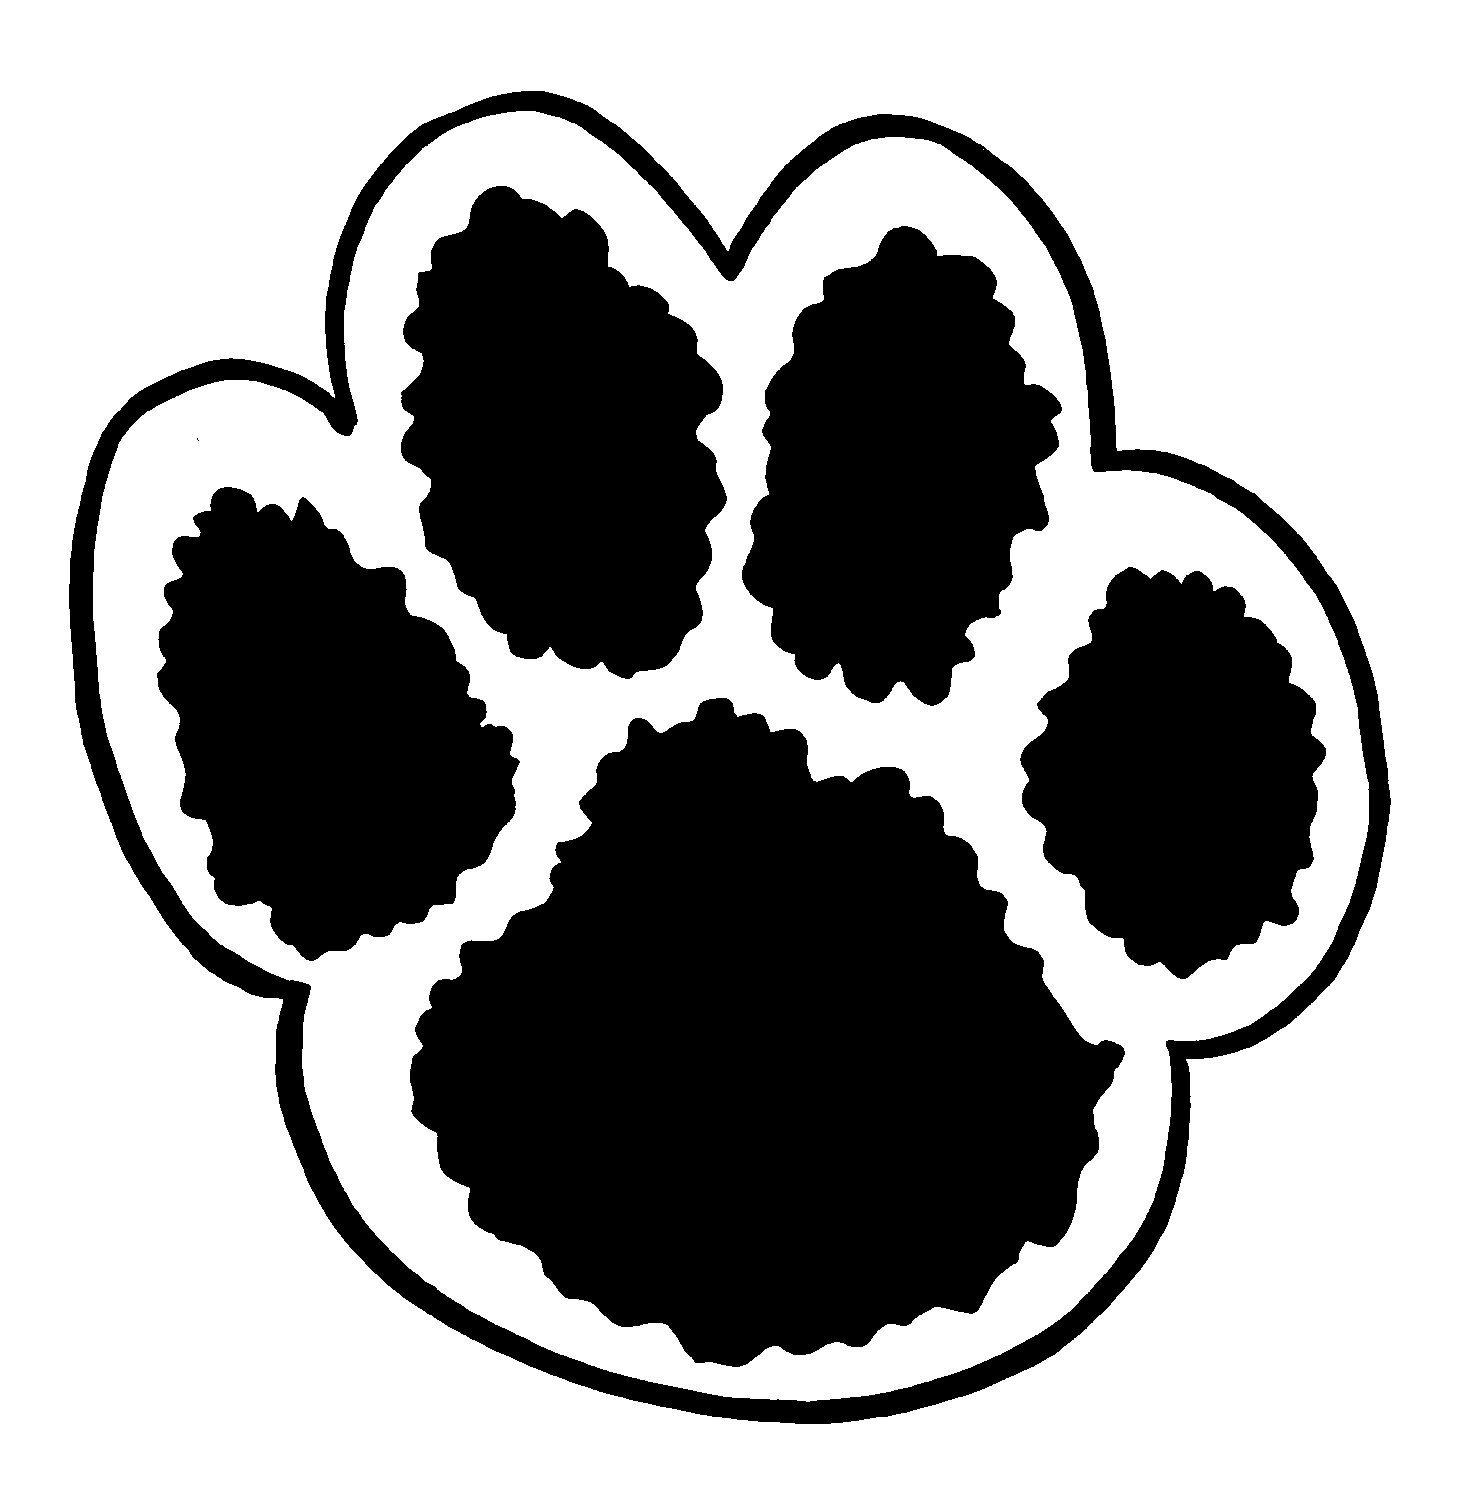 is-this-paw-print-from-a-mountain-lion-or-a-big-dog-coastside-buzz